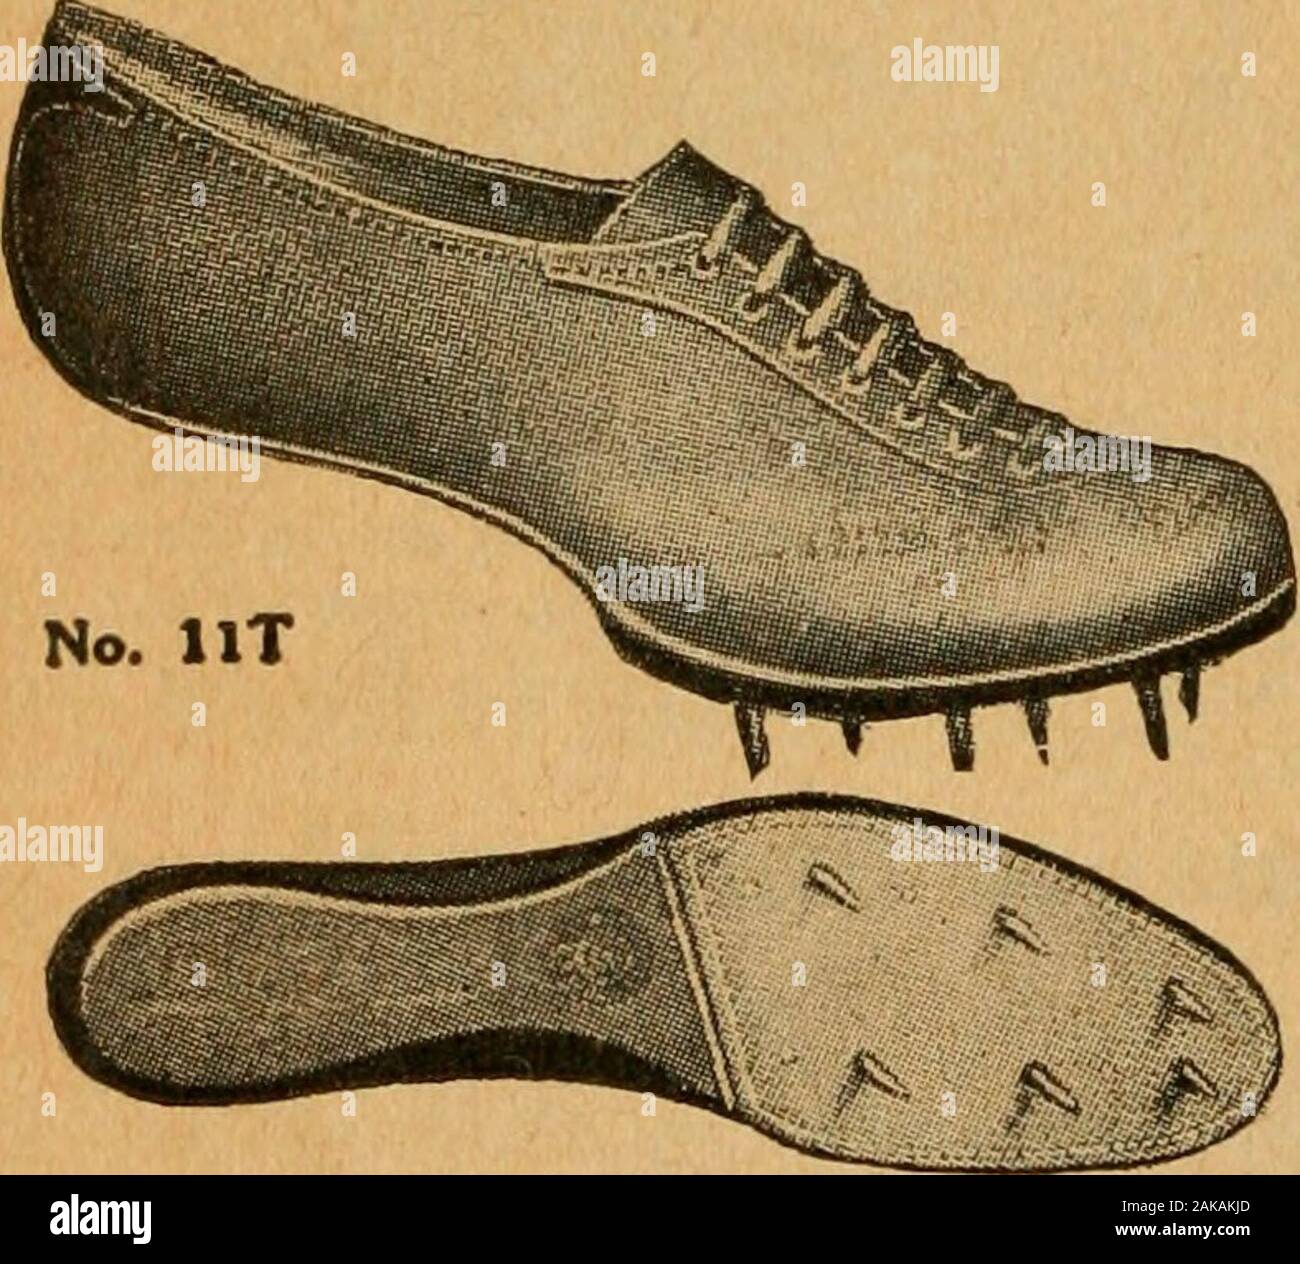 How to become an athlete . Spalding Indoor Running Shoes No. 111. Soft  leather, corrugated rubber soles,with spikes Pair, $5.00 Spalding Outdoor  Jumping Shoes No. 14J. Strong leather; machine made. Dur-able. Steel